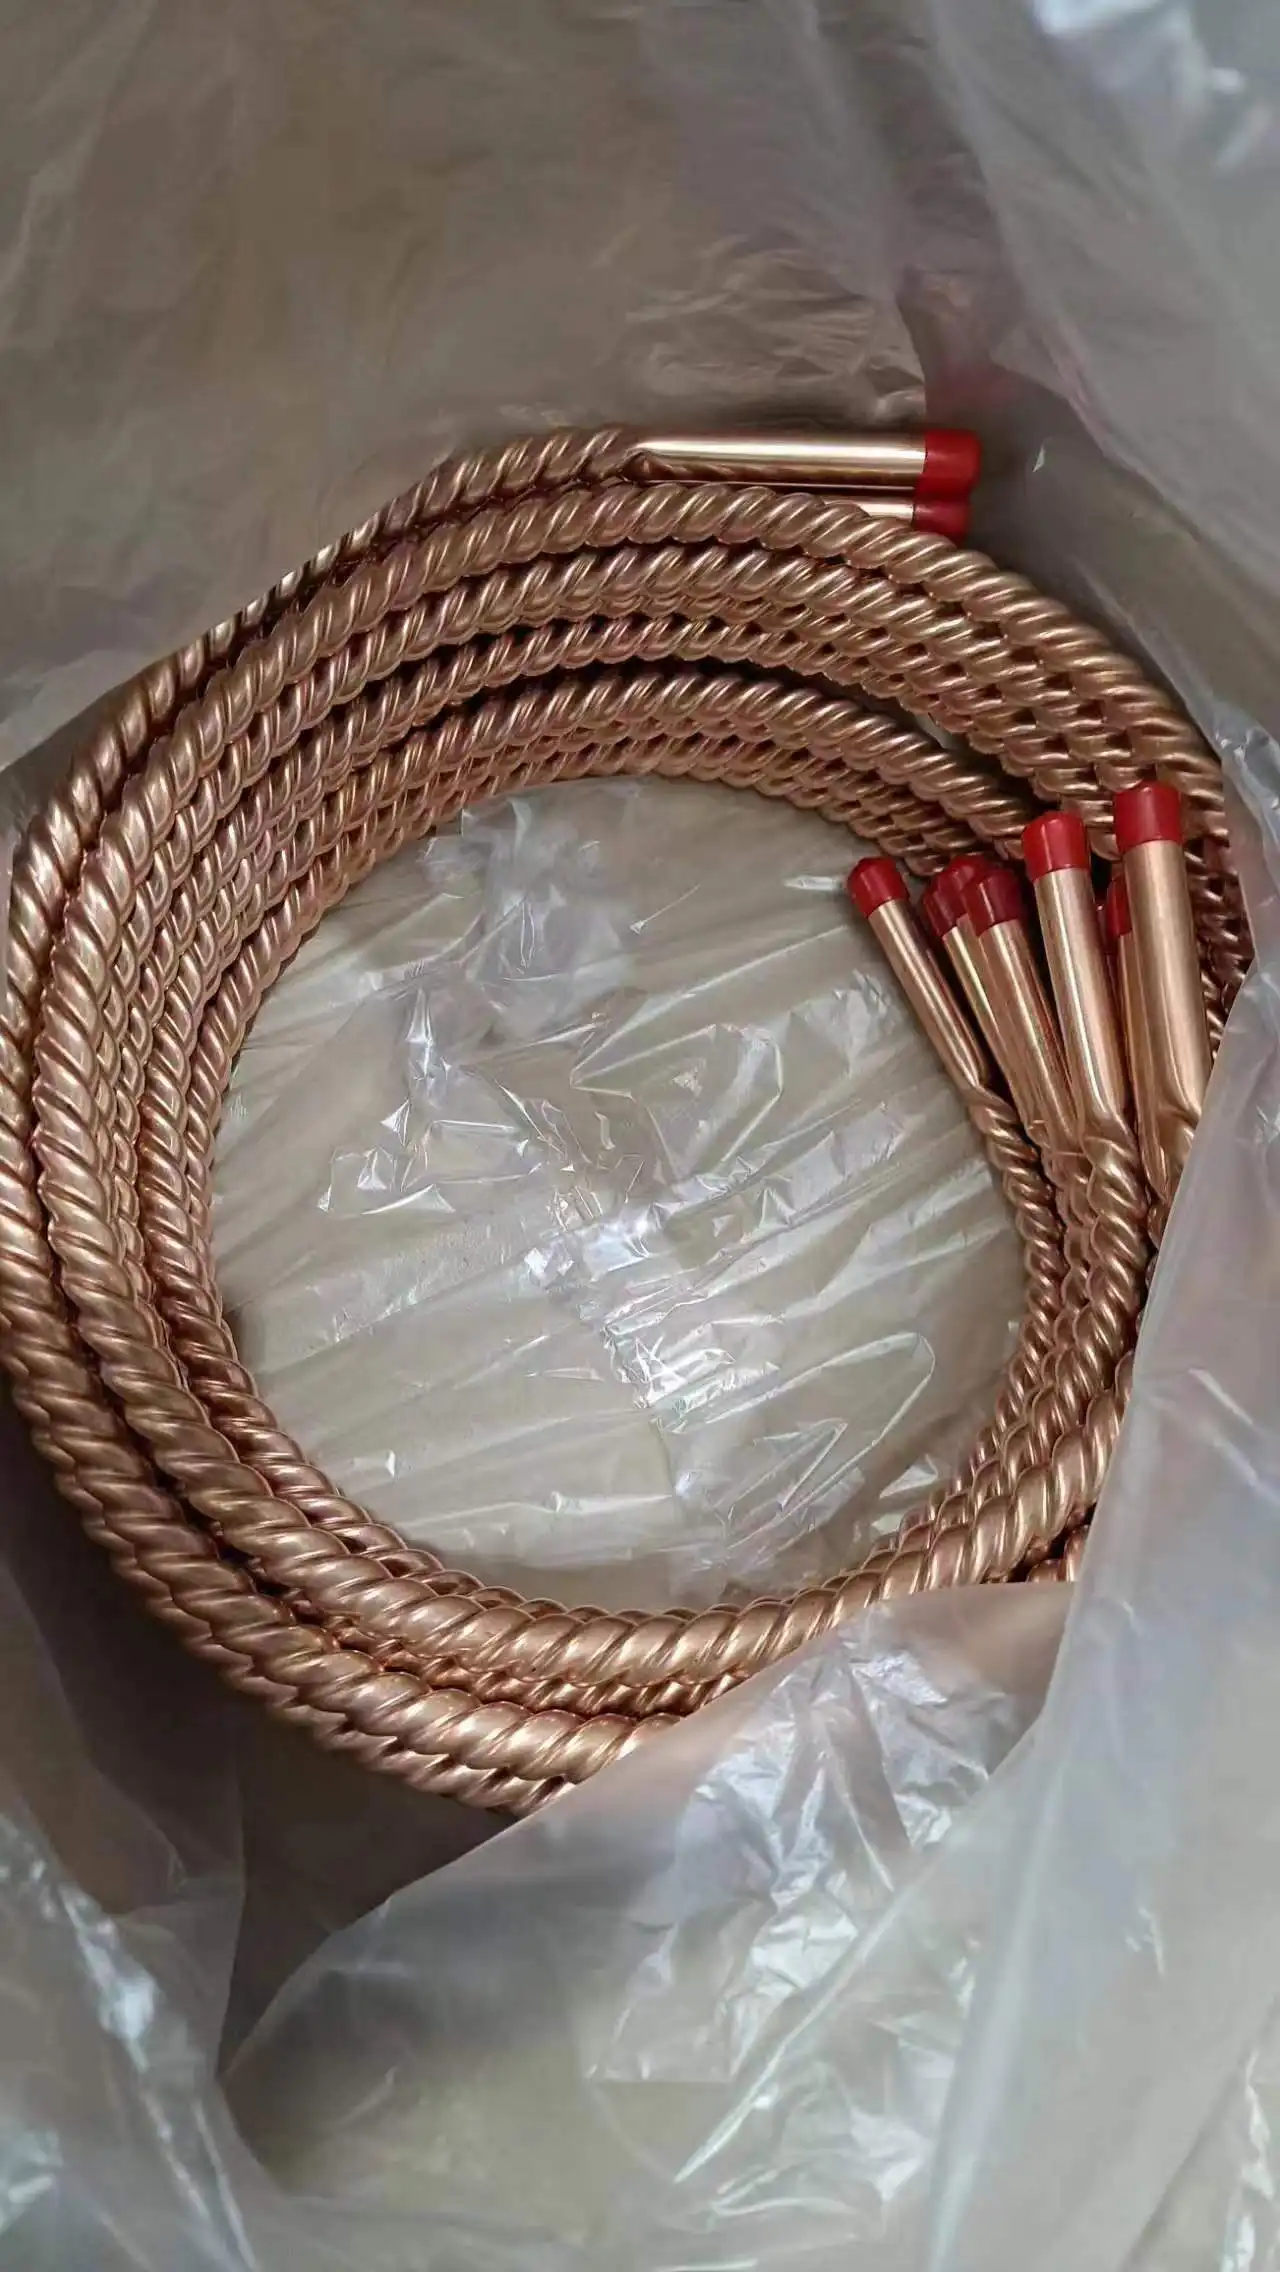 1/4\" ASTM B280 Seamless Copper Tube R410A Refrigerant 10 FT Air Conditioning Refrigeration Coil Tubing